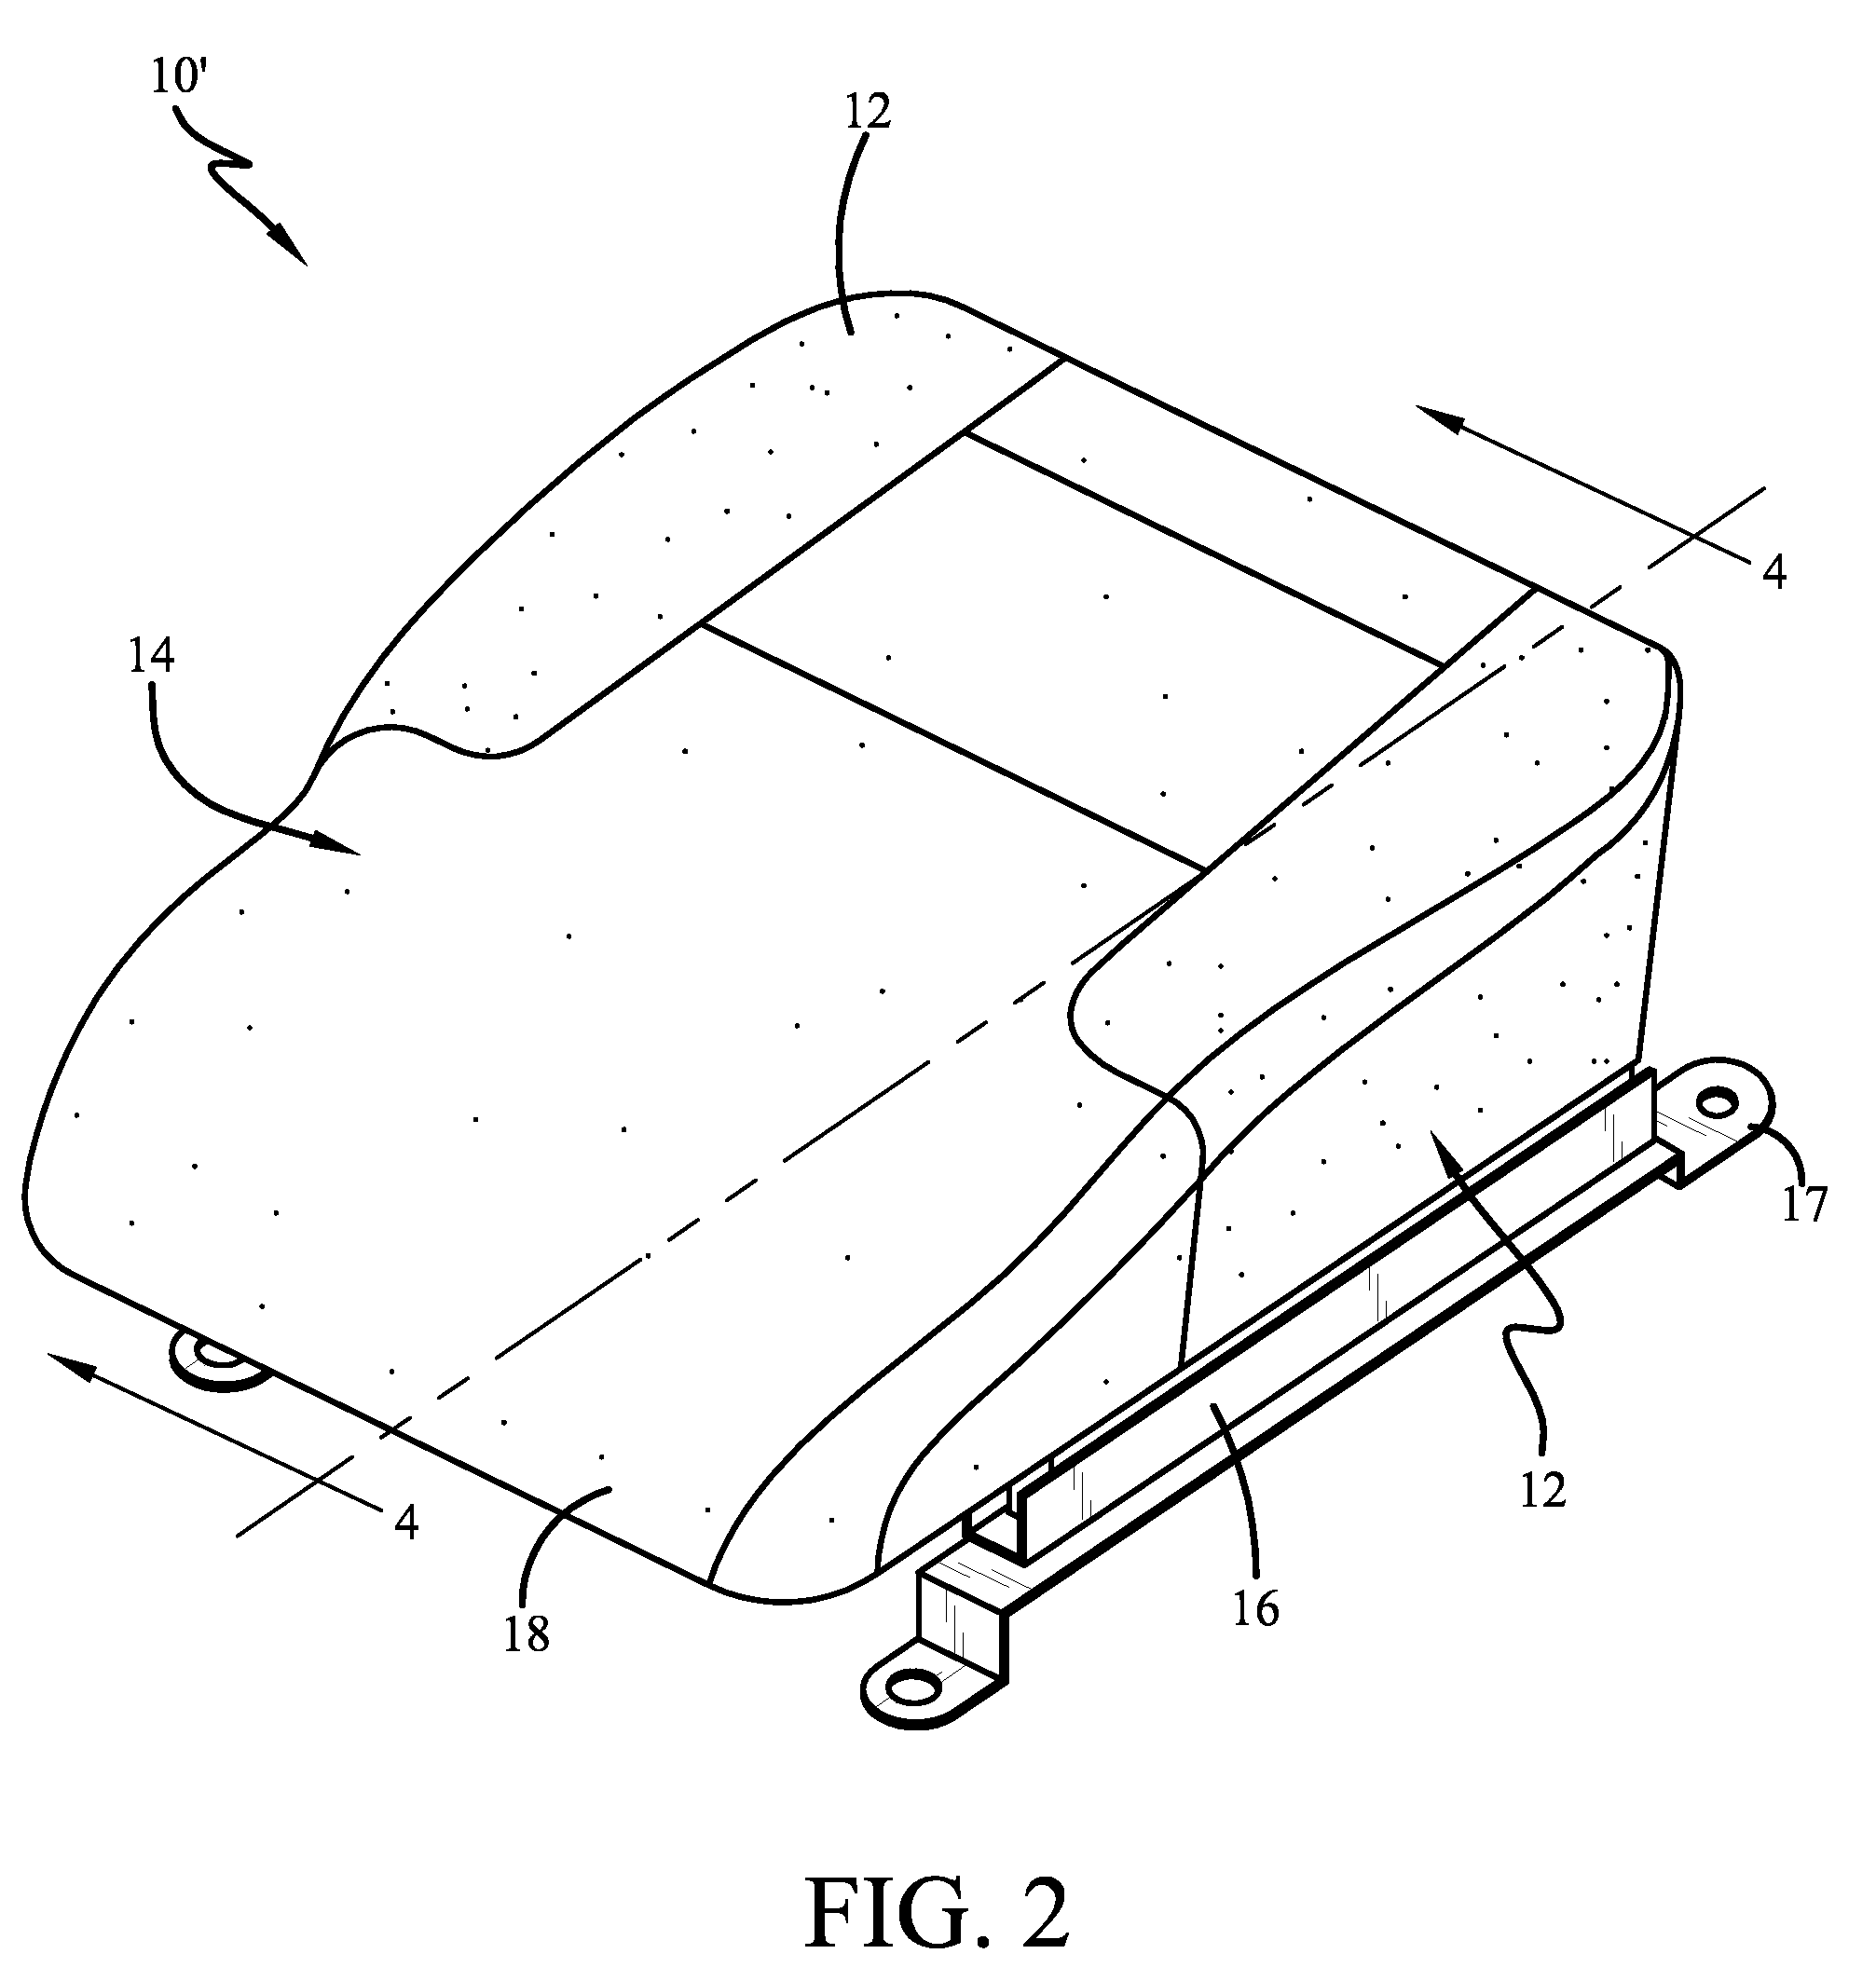 Adjustable thigh support for automobile seat via adjustment plate